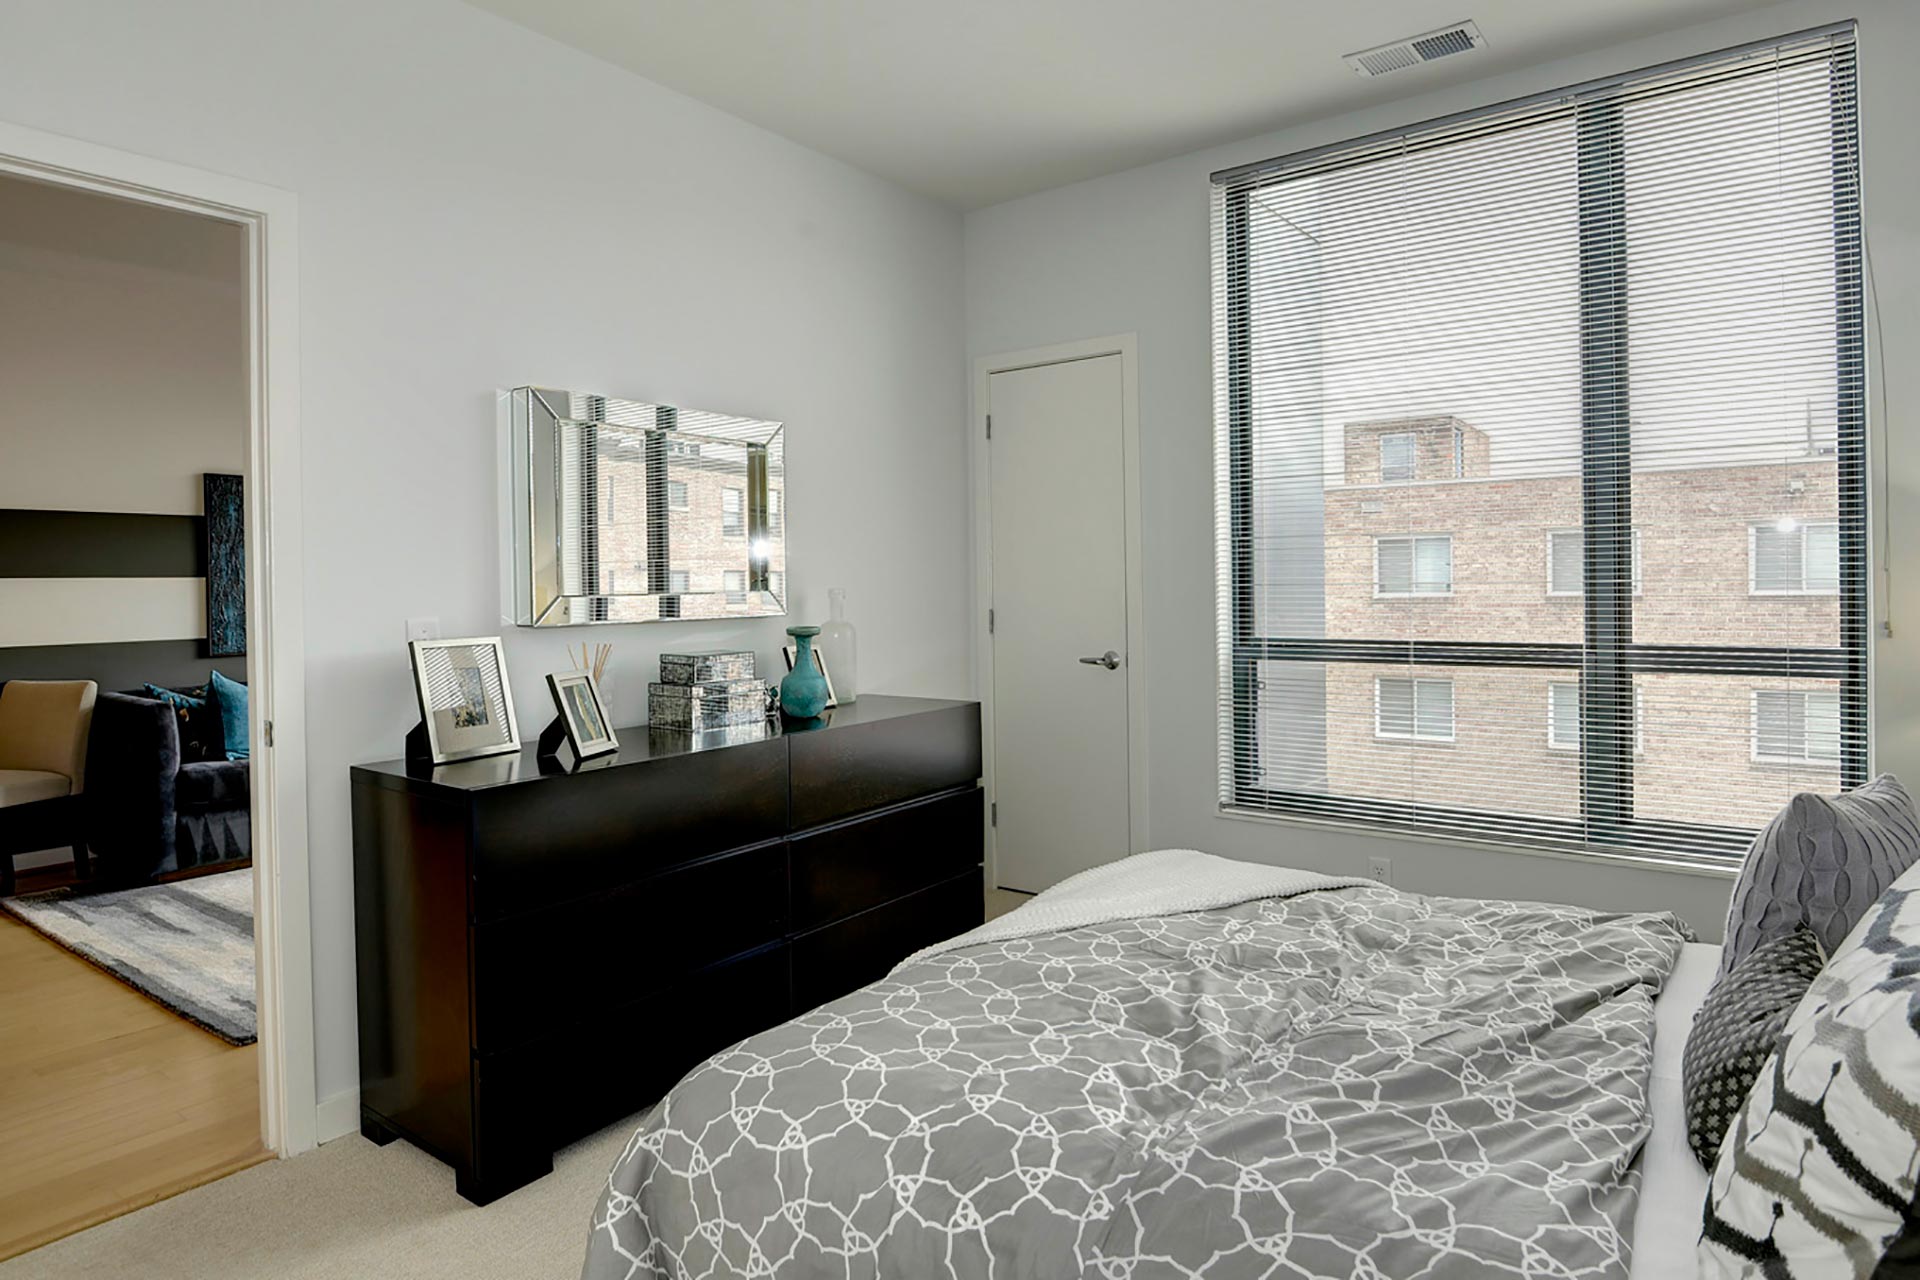 Model unit bedroom with queen bed, dresser, and large window, with door open to the living room on the far left